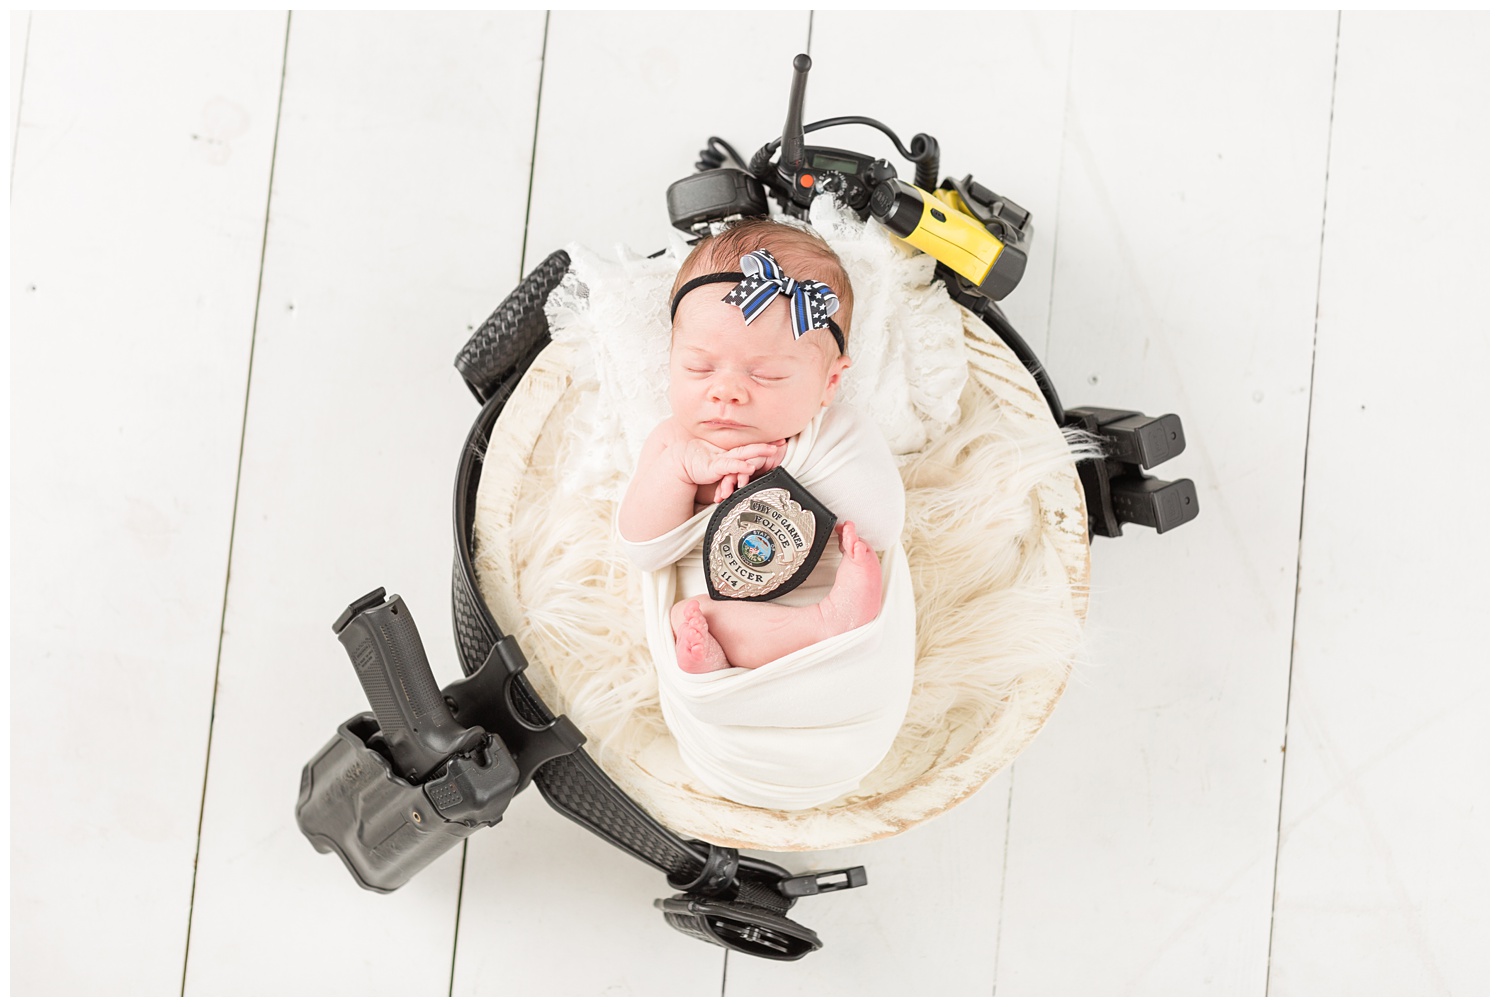 Thin Blue Line police support newborn baby girl wrapped in white supports her daddy who is a police officer in Garner, Iowa | CB Studio